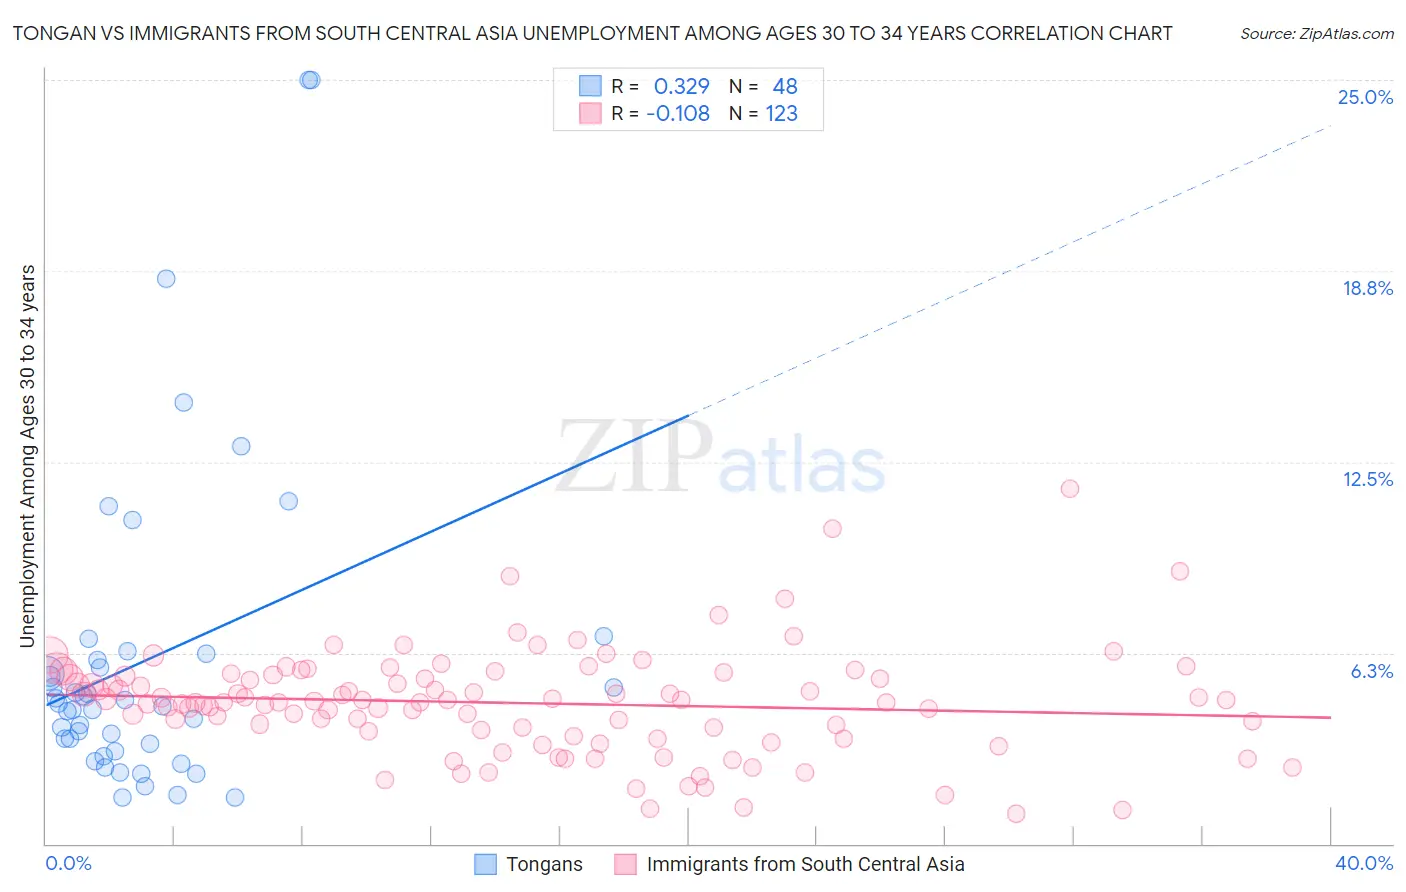 Tongan vs Immigrants from South Central Asia Unemployment Among Ages 30 to 34 years